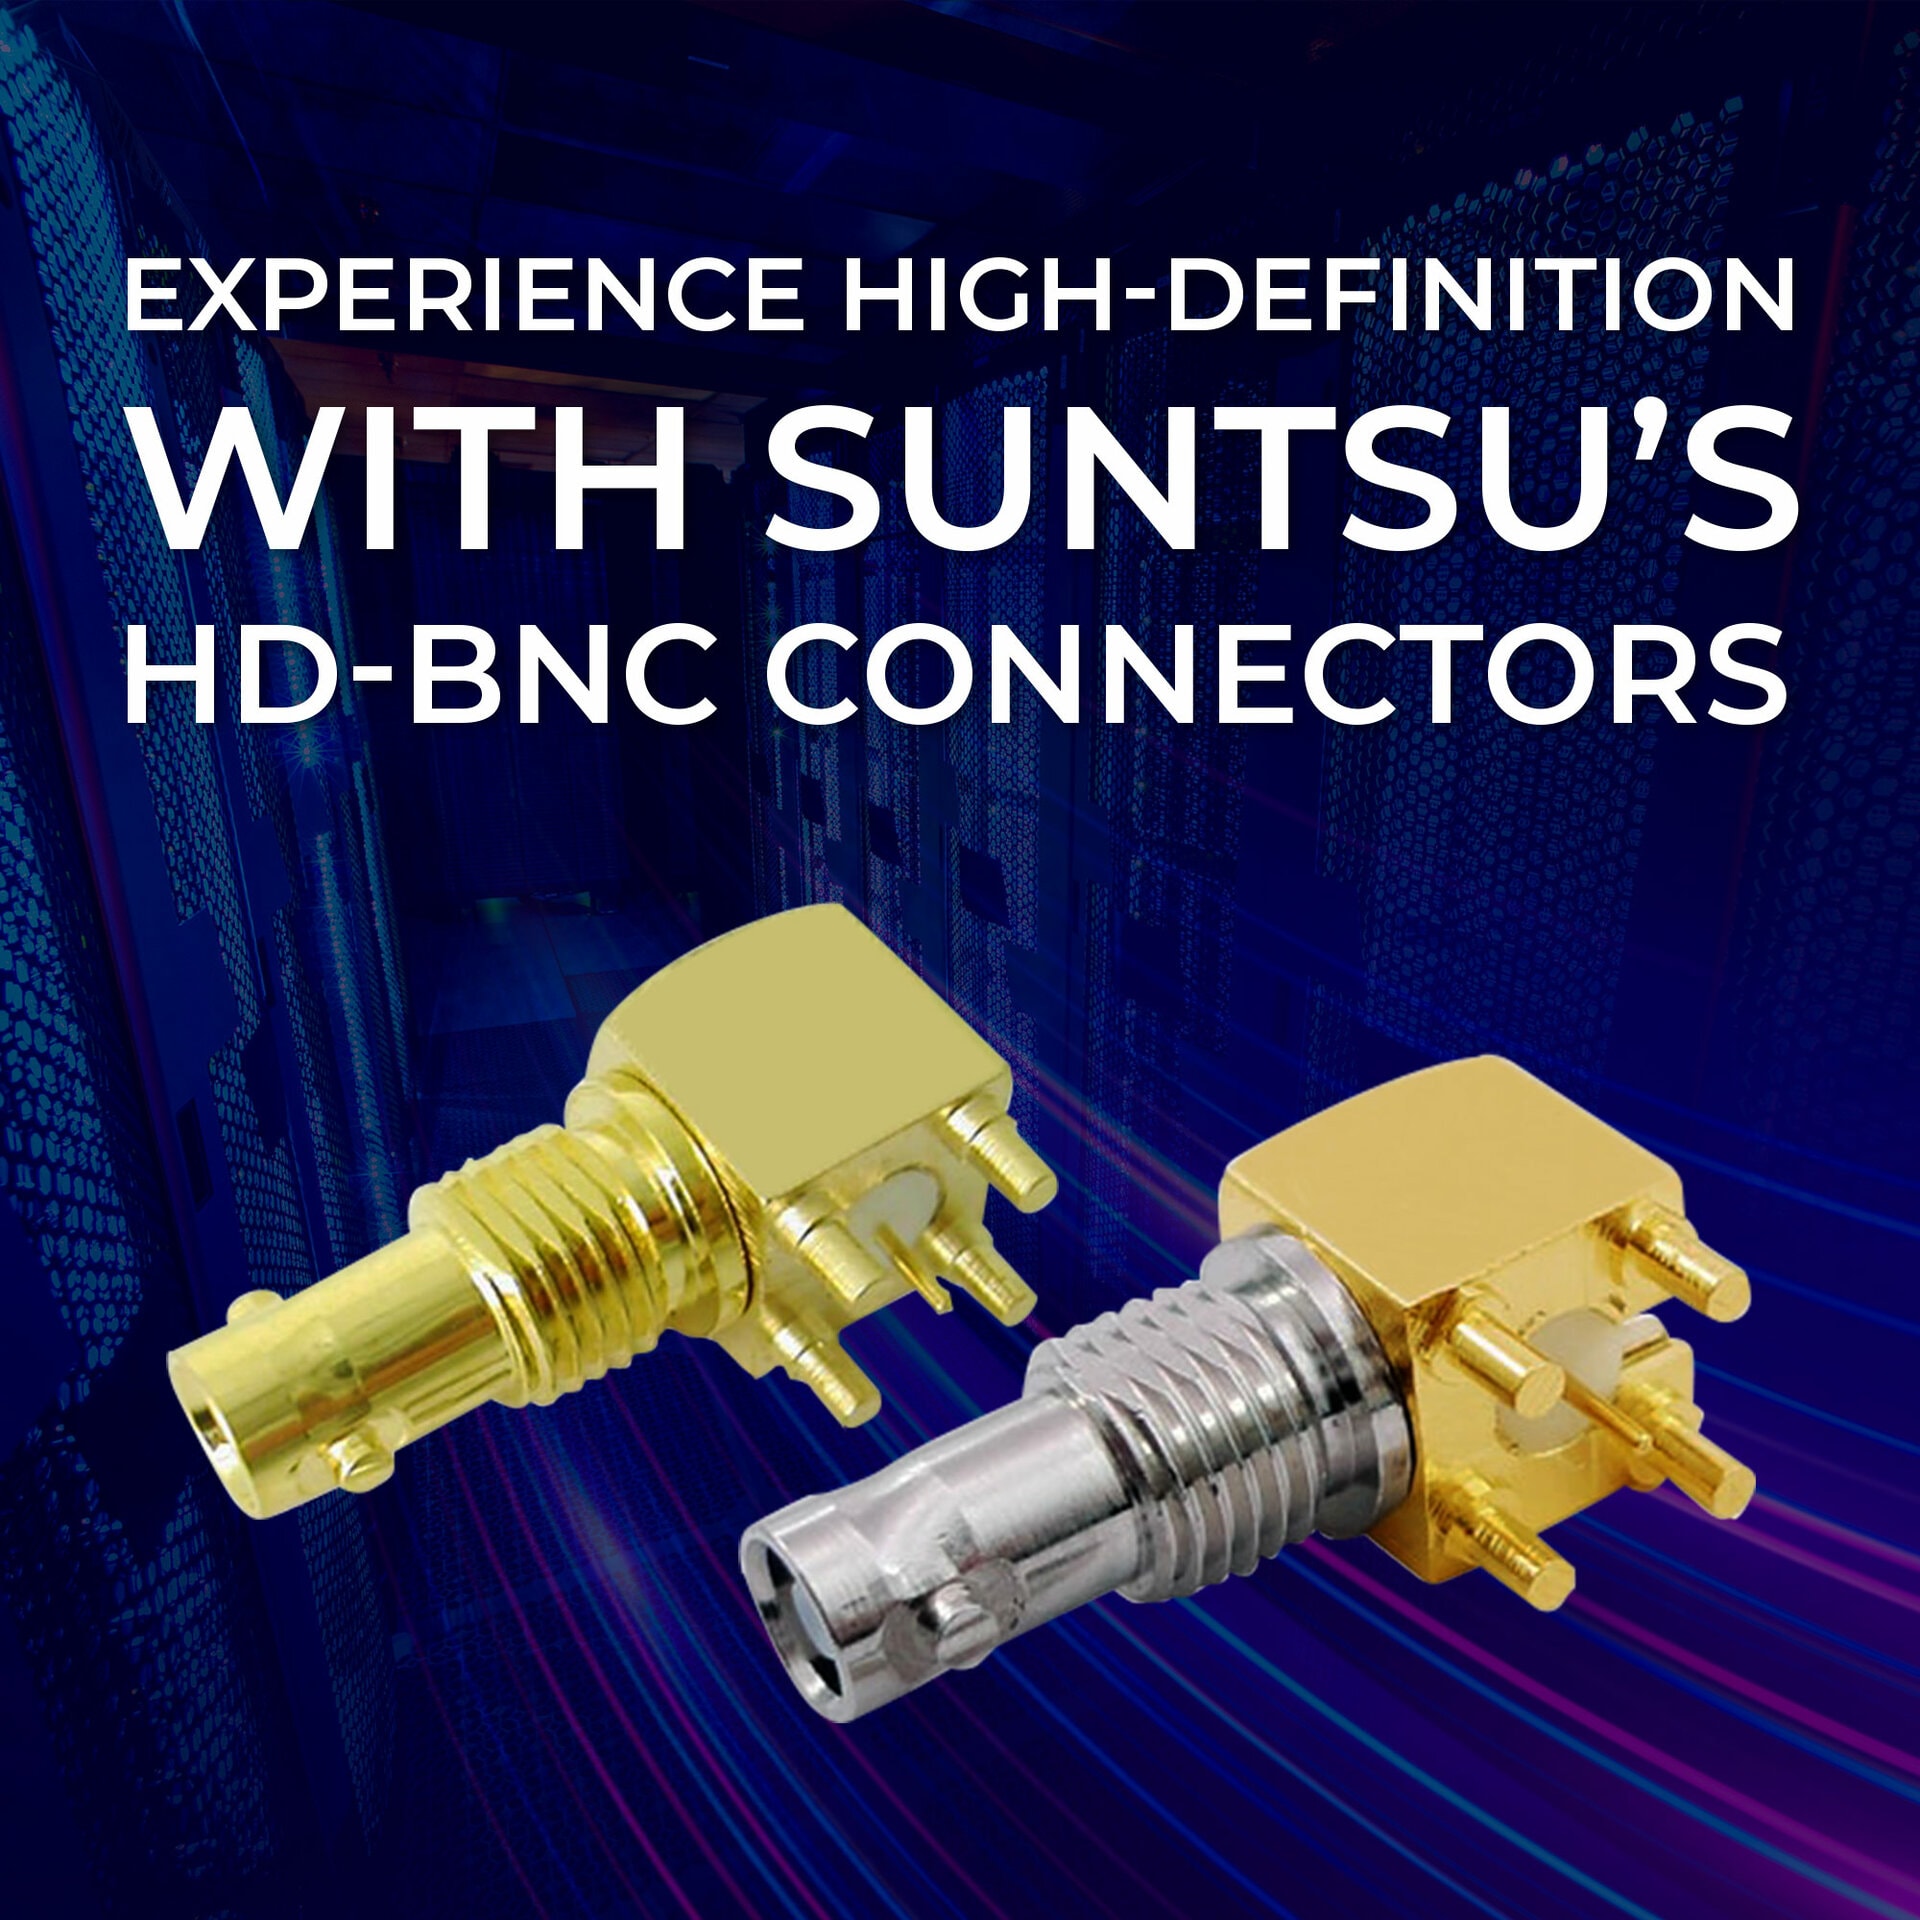 Experience High-Definition with Suntsu’s HD-BNC Connectors